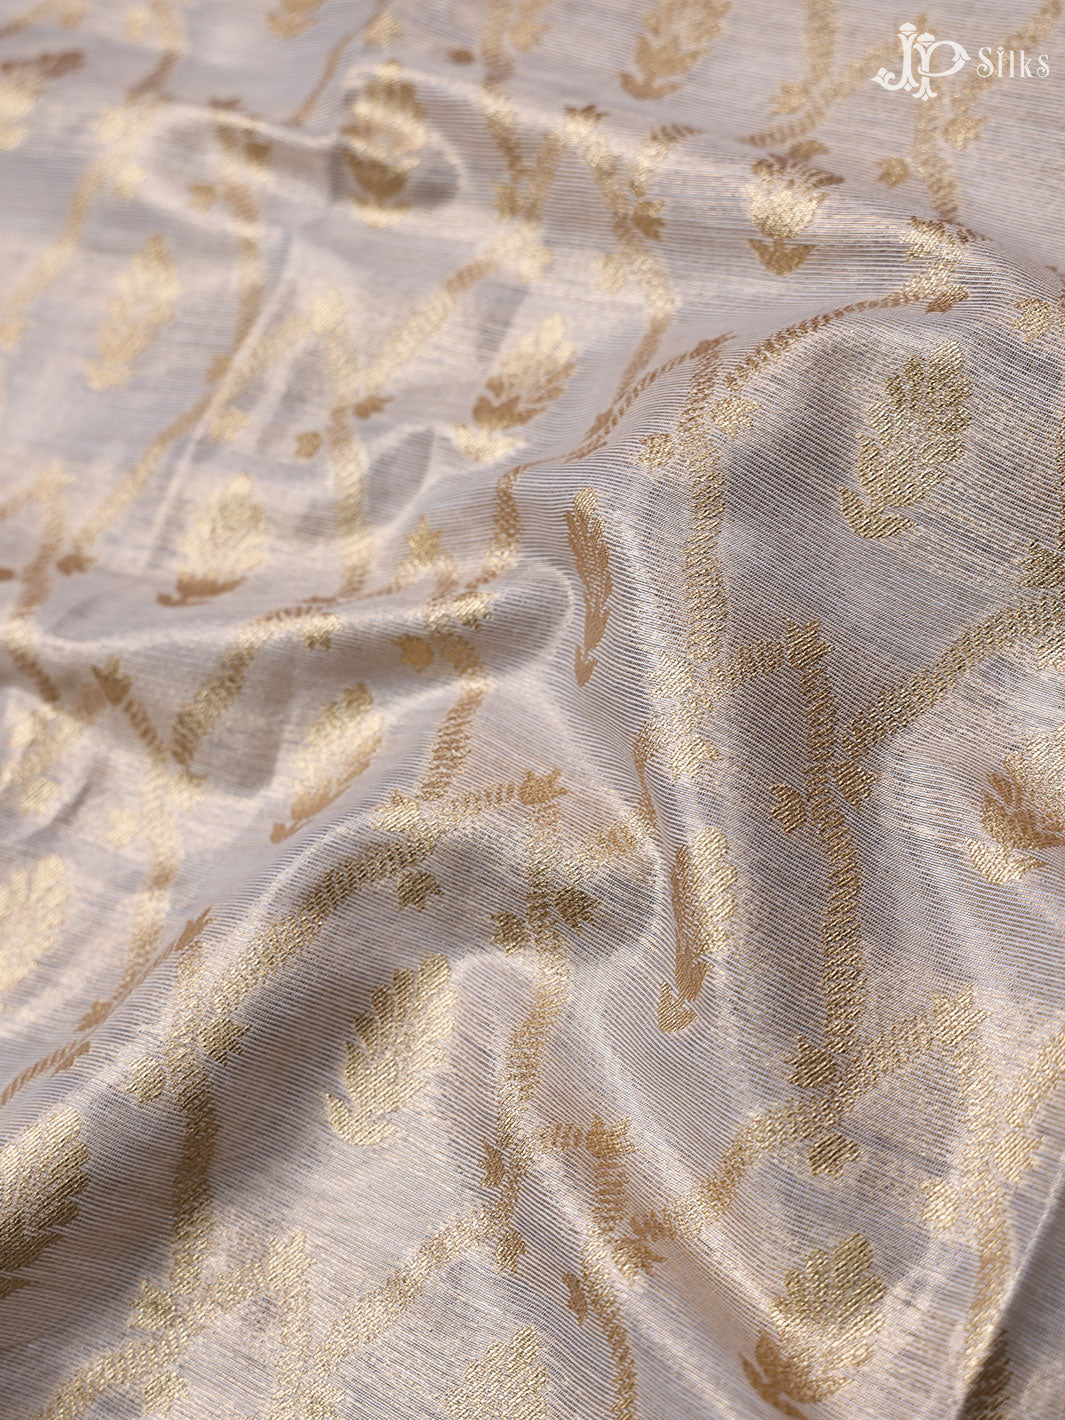 White and Gold Banaras Cotton Unstiched Chudidhar Material - E1933 - View 5